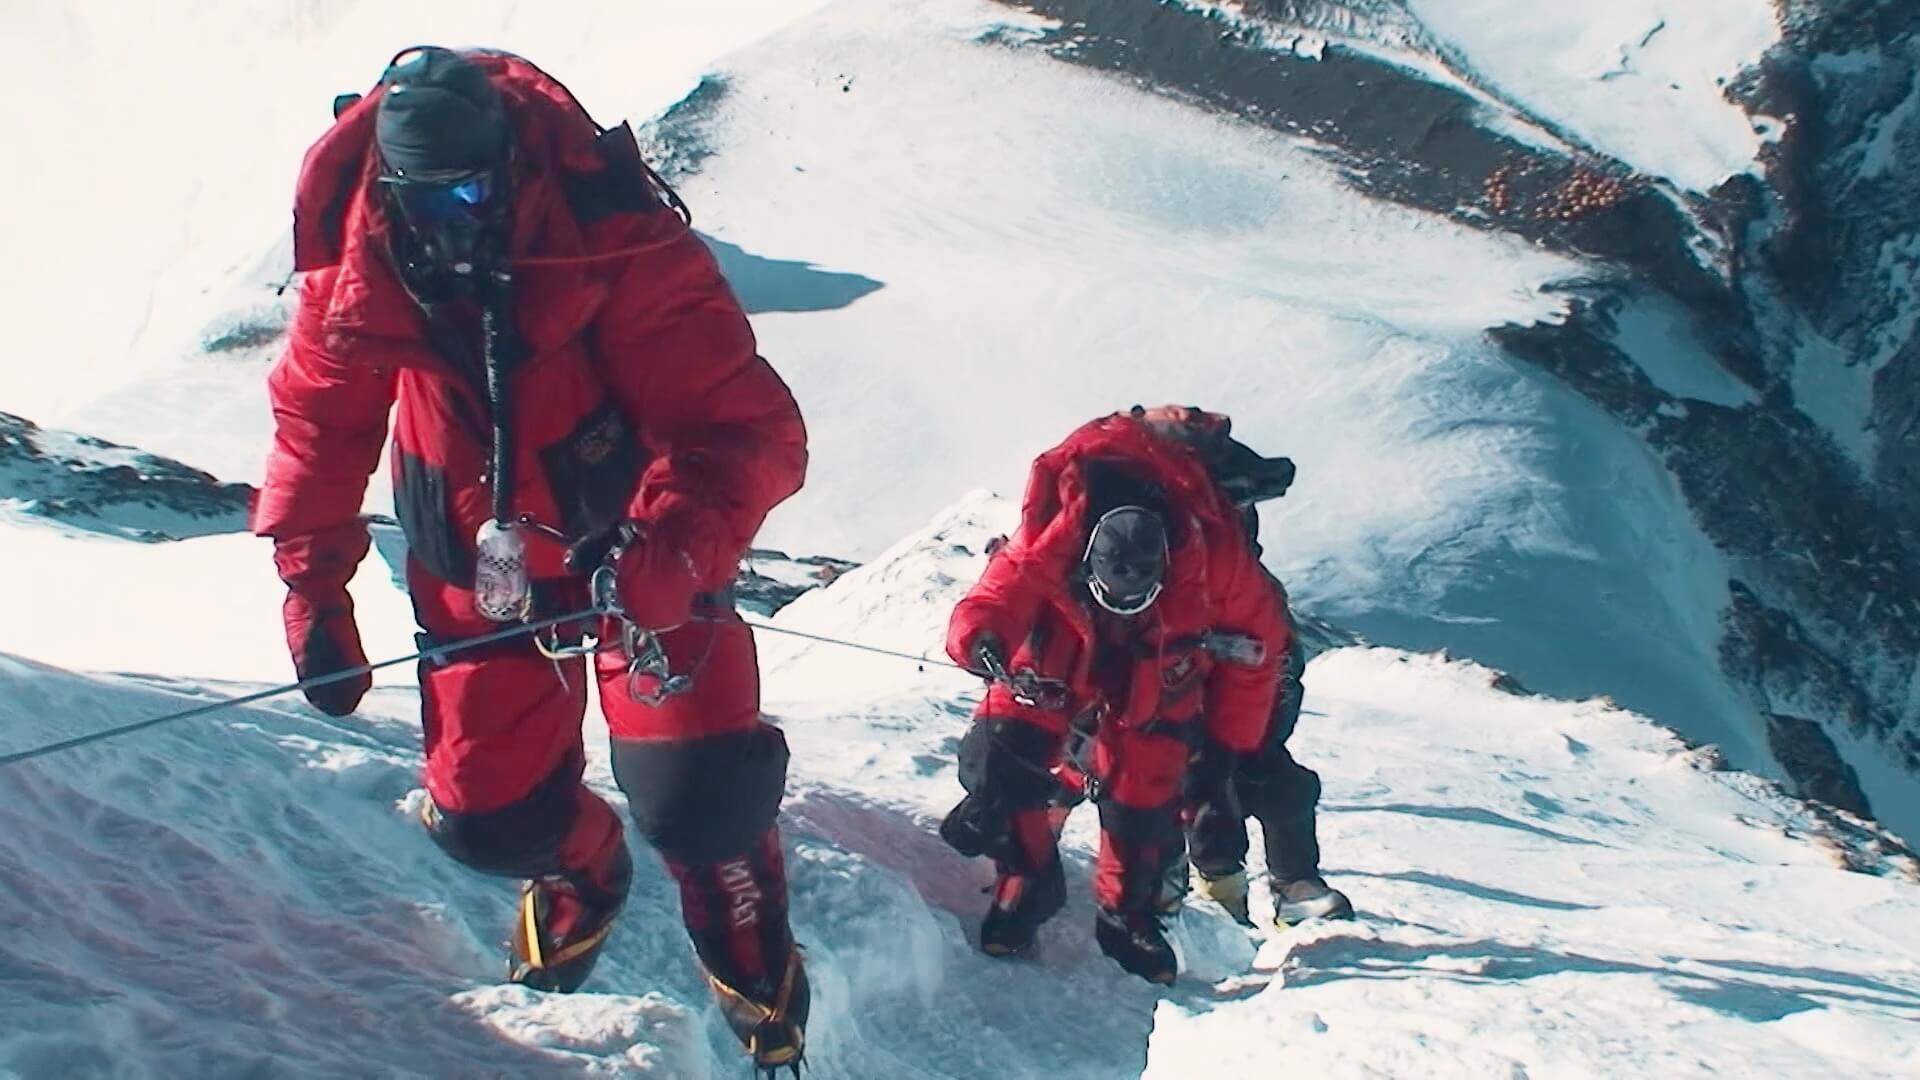 Beer can help you climb mt everest hero image